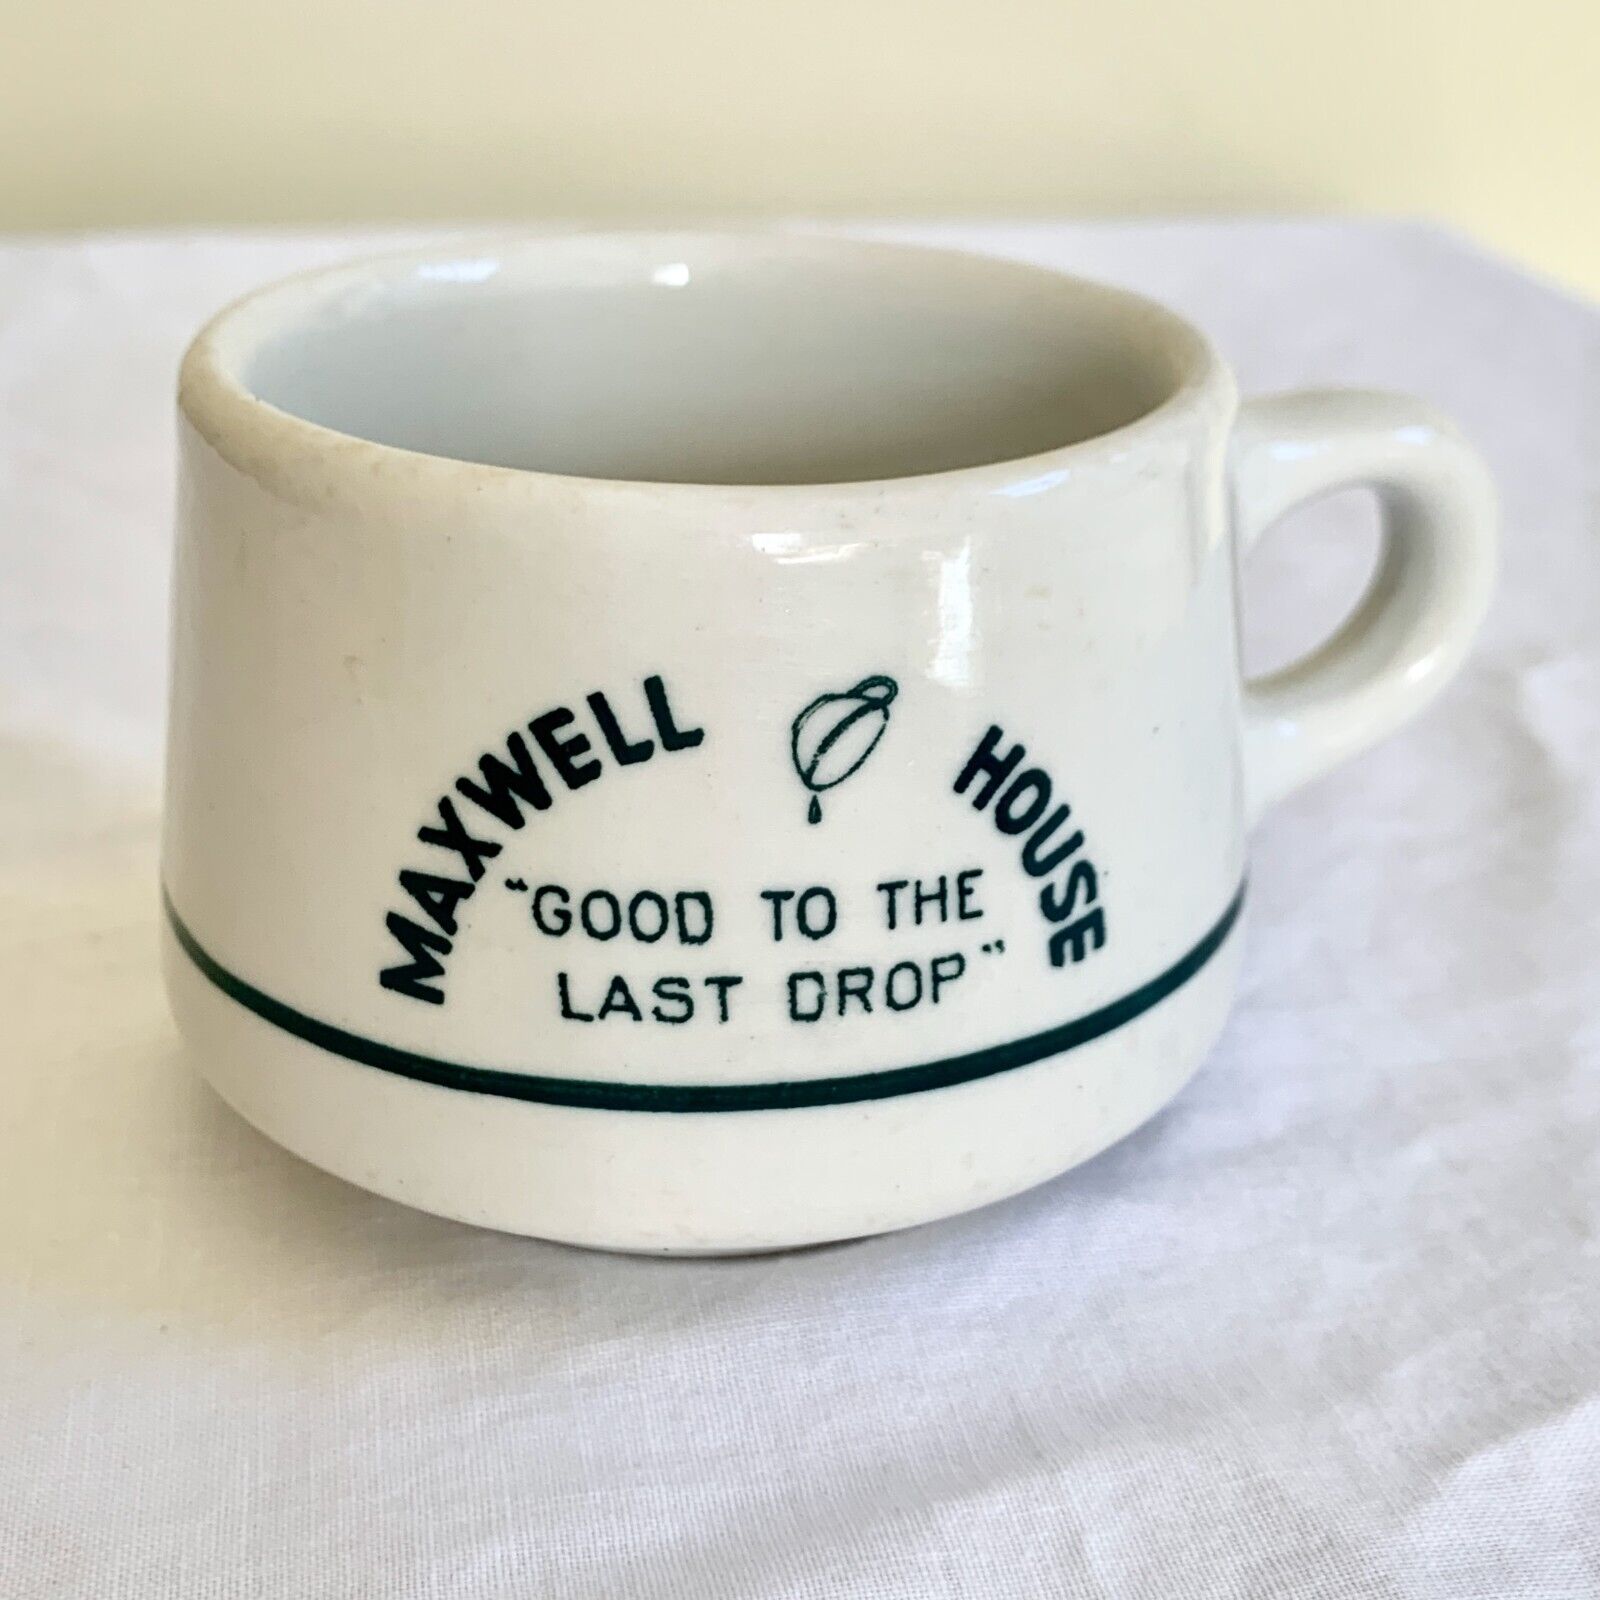 Vintage Maxwell House Good To The Last Drop Restaurant Diner Coffee Cup Mug